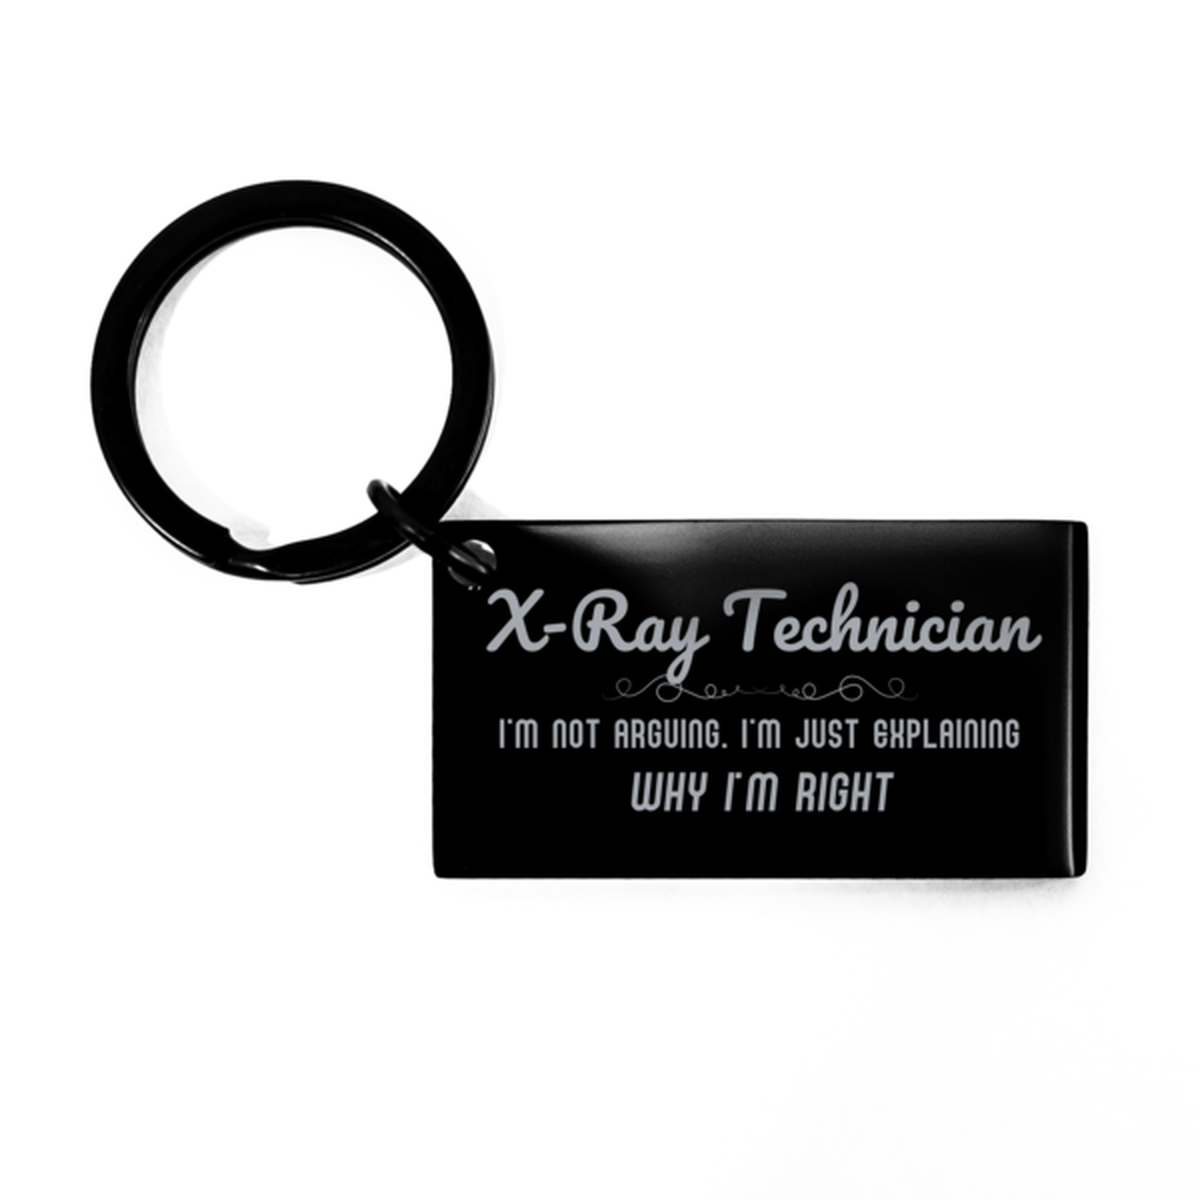 X-Ray Technician I'm not Arguing. I'm Just Explaining Why I'm RIGHT Keychain, Funny Saying Quote X-Ray Technician Gifts For X-Ray Technician Graduation Birthday Christmas Gifts for Men Women Coworker